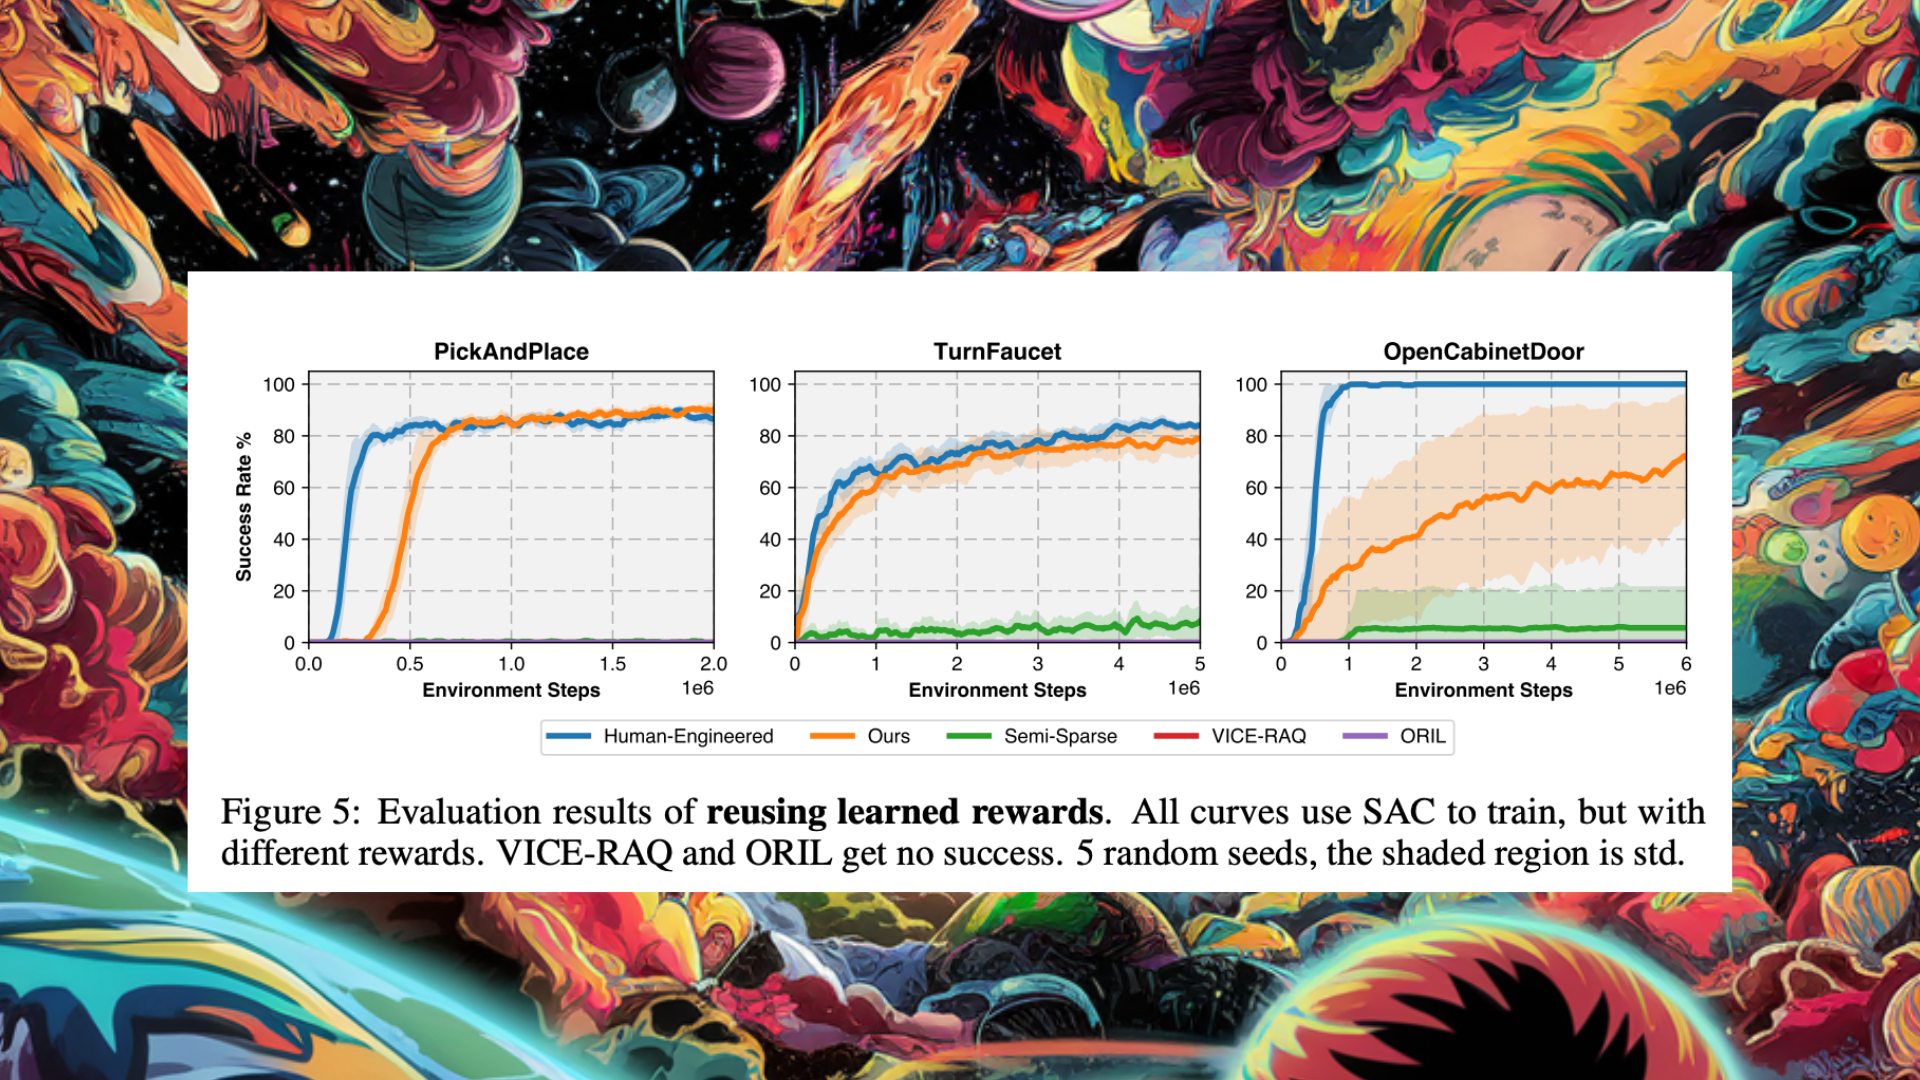 Researchers at UC San Diego Propose DrS: A Novel Machine Learning Approach for Learning Reusable Dense Rewards for Multi-Stage Tasks in a Data-Driven Manner